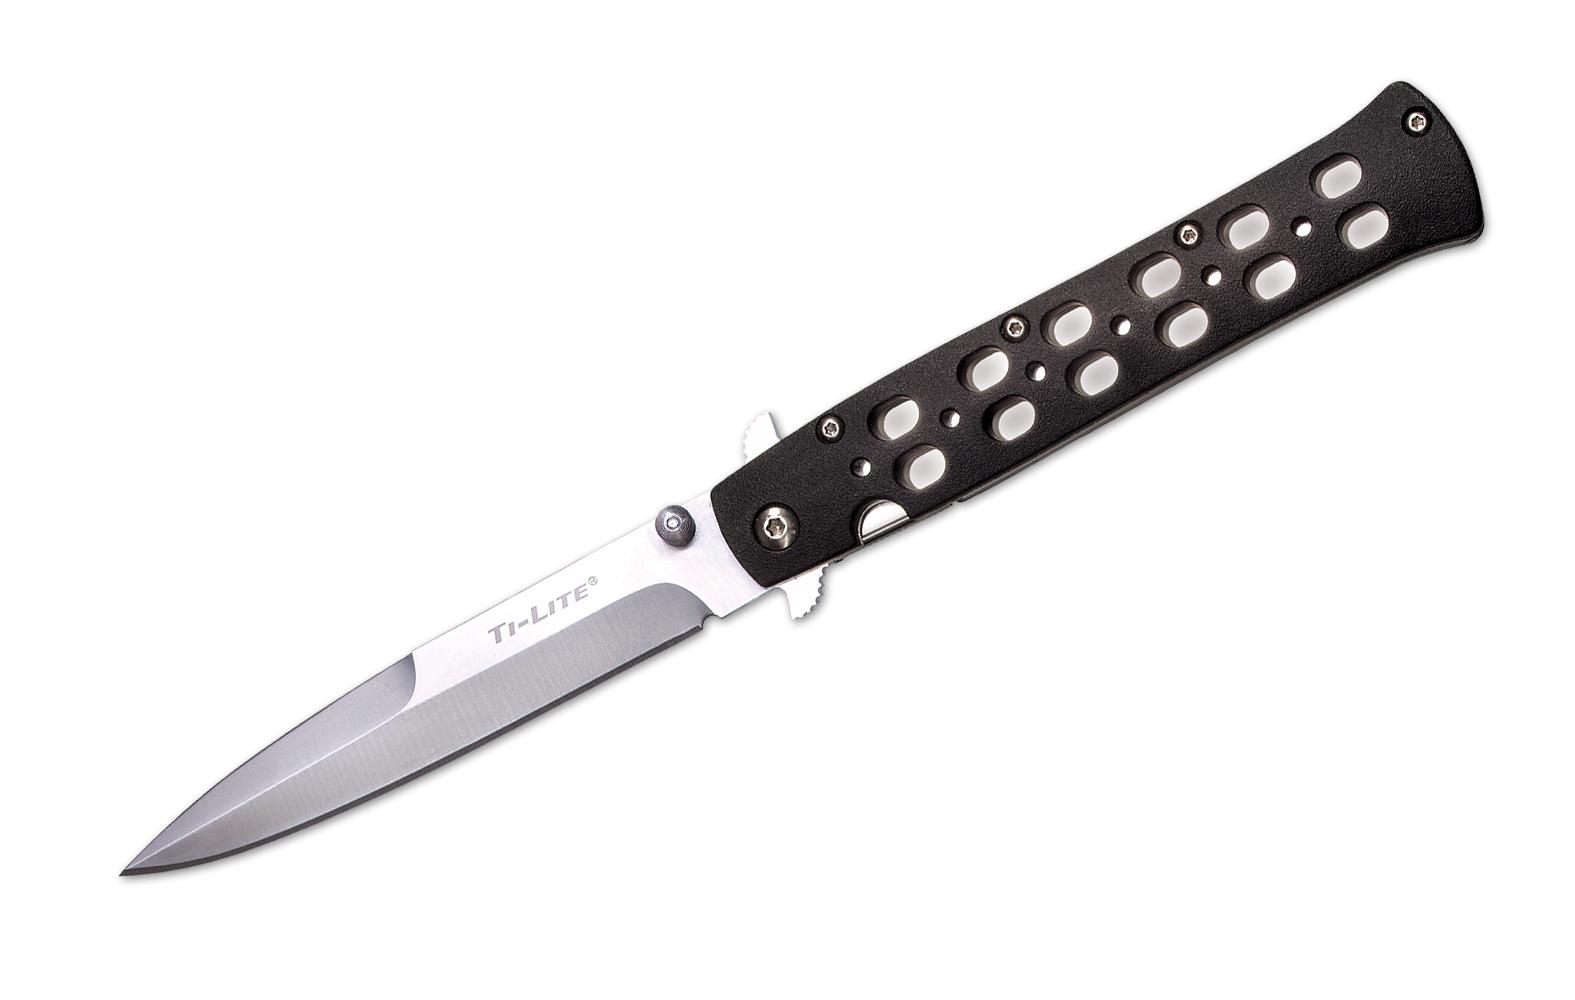 Foto Cold Steel Ti-Lite Zy-Ex Handle 4in. (Modell 2012/13)